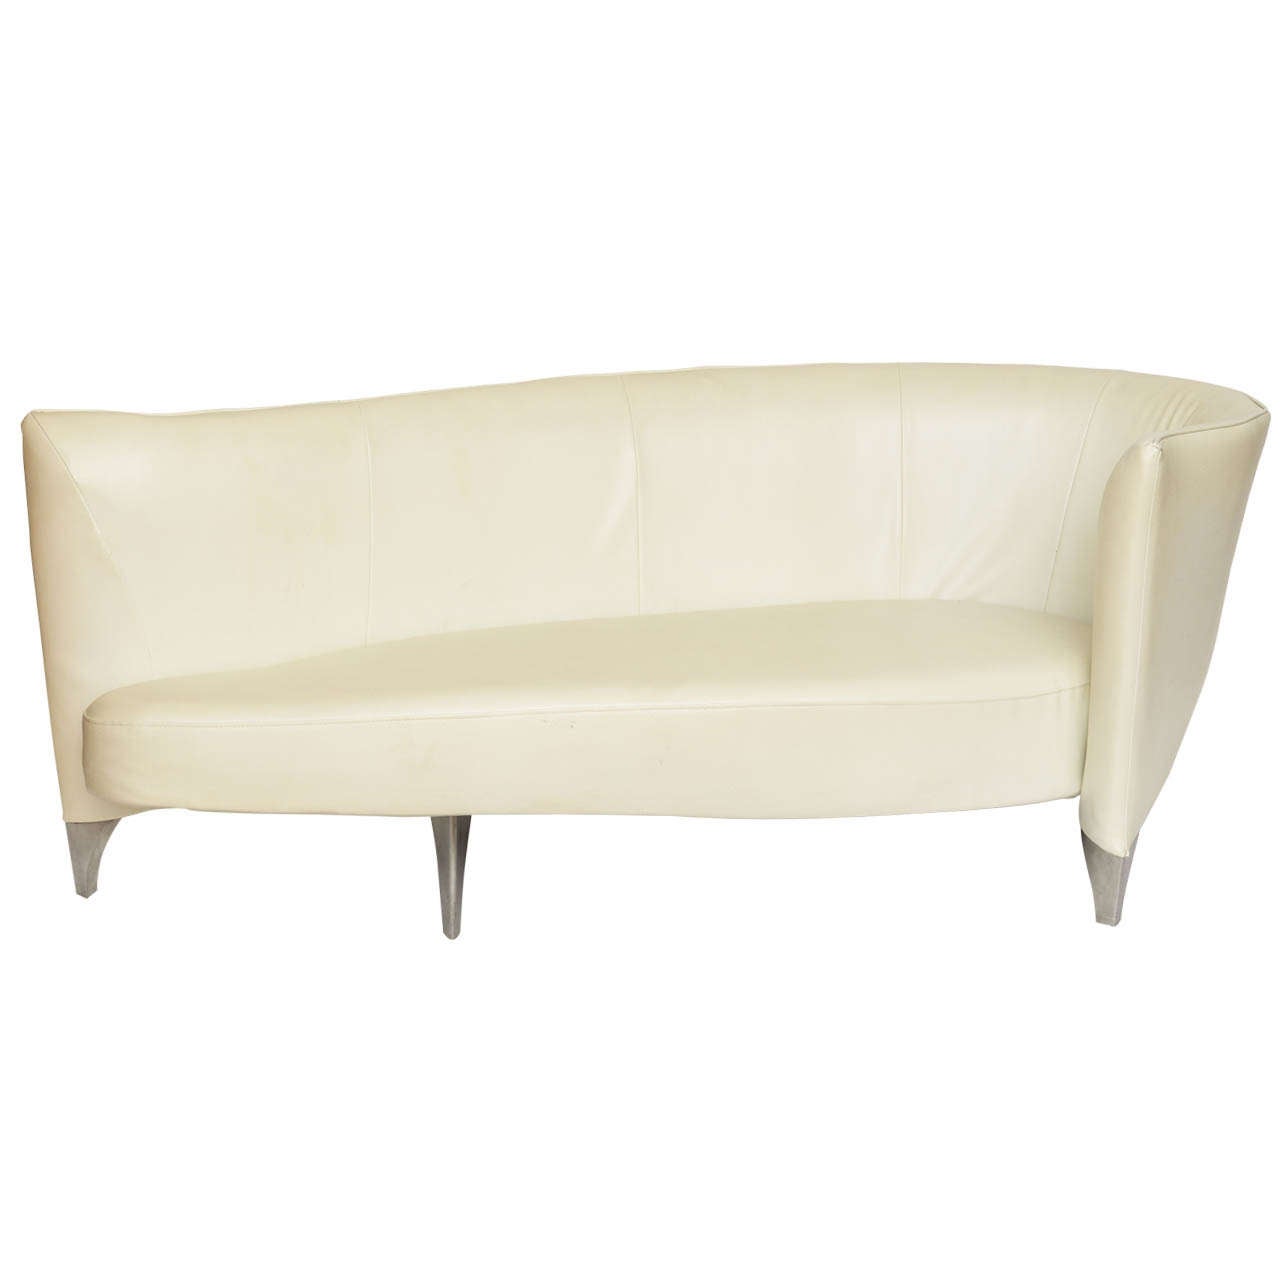 Philippe Starck Assymetrical Love Seat With Chrome Legs 20th Century